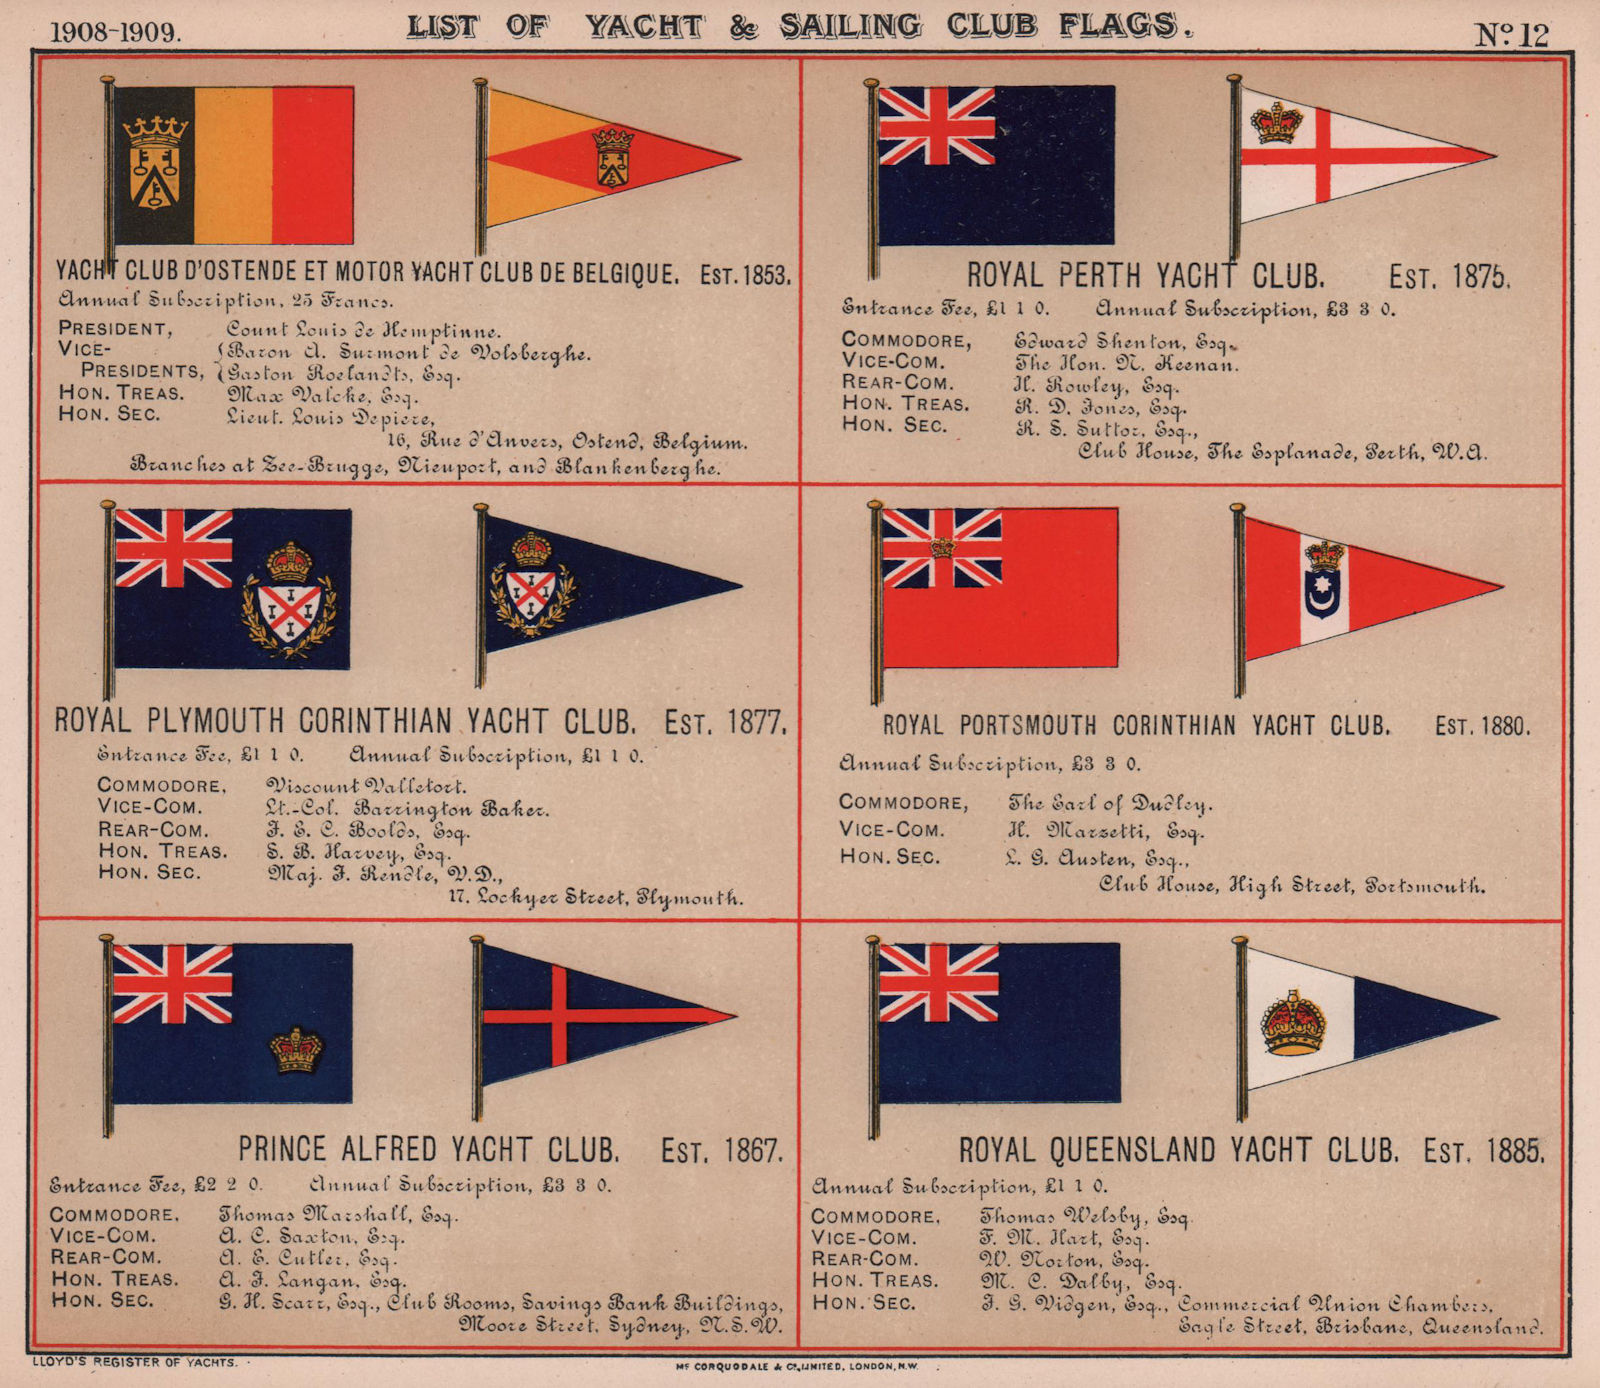 Associate Product ROYAL YACHT & SAILING CLUB FLAGS O-Q Ostende Plymouth Portsmouth Queensland 1908